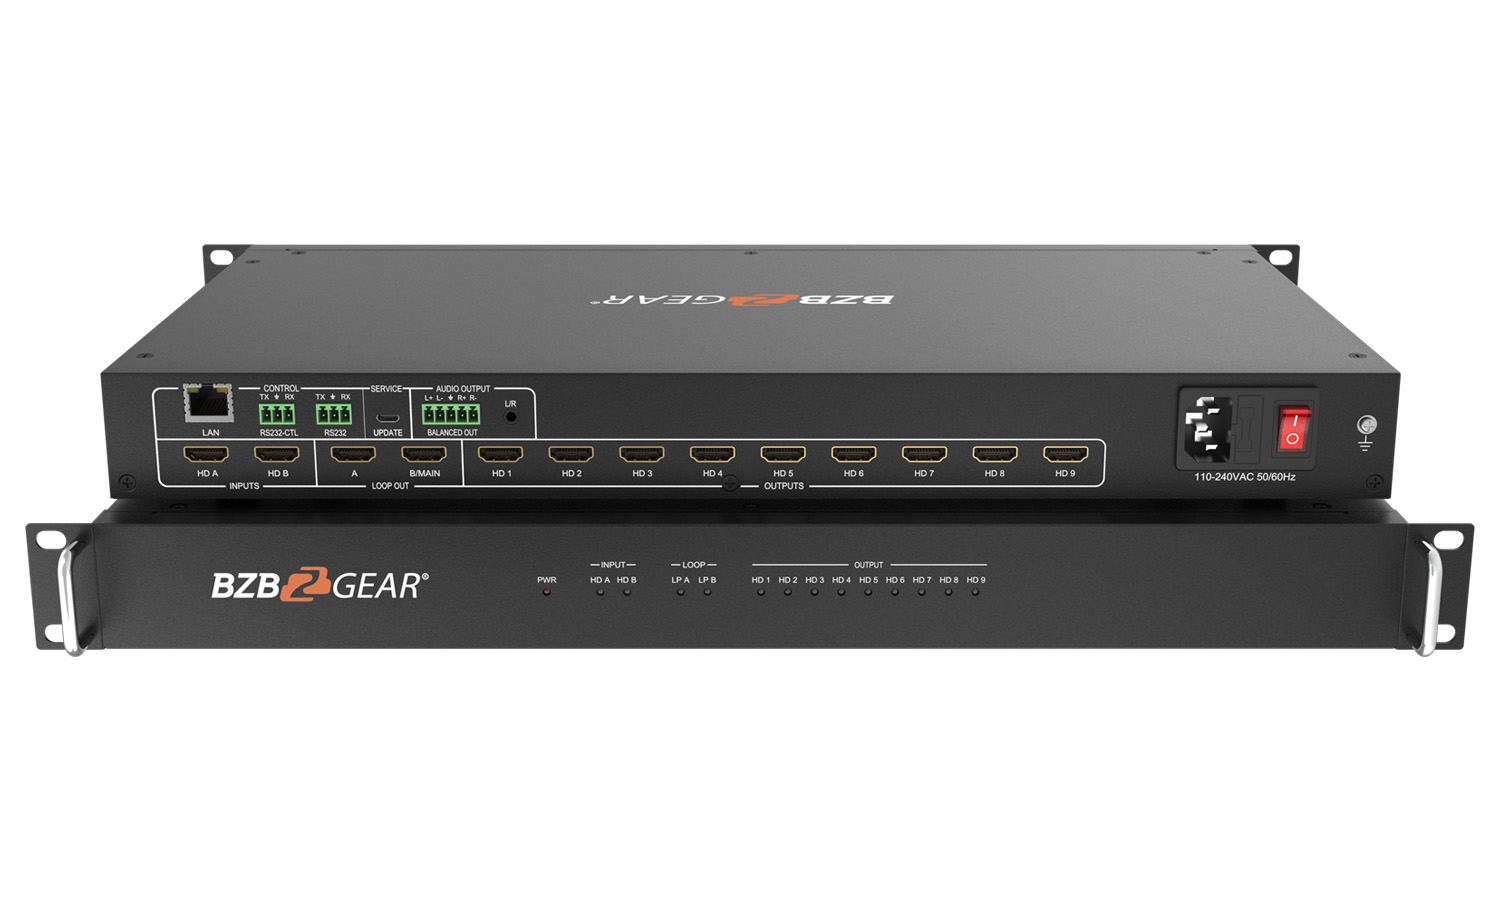 BG-UHD-VW29 3x3 4K UHD HDMI Video Wall Processor with IP/RS232 Control (Supports 1x3/1x4/2x2/2x3 up to 3x3 Layout) by BZBGEAR